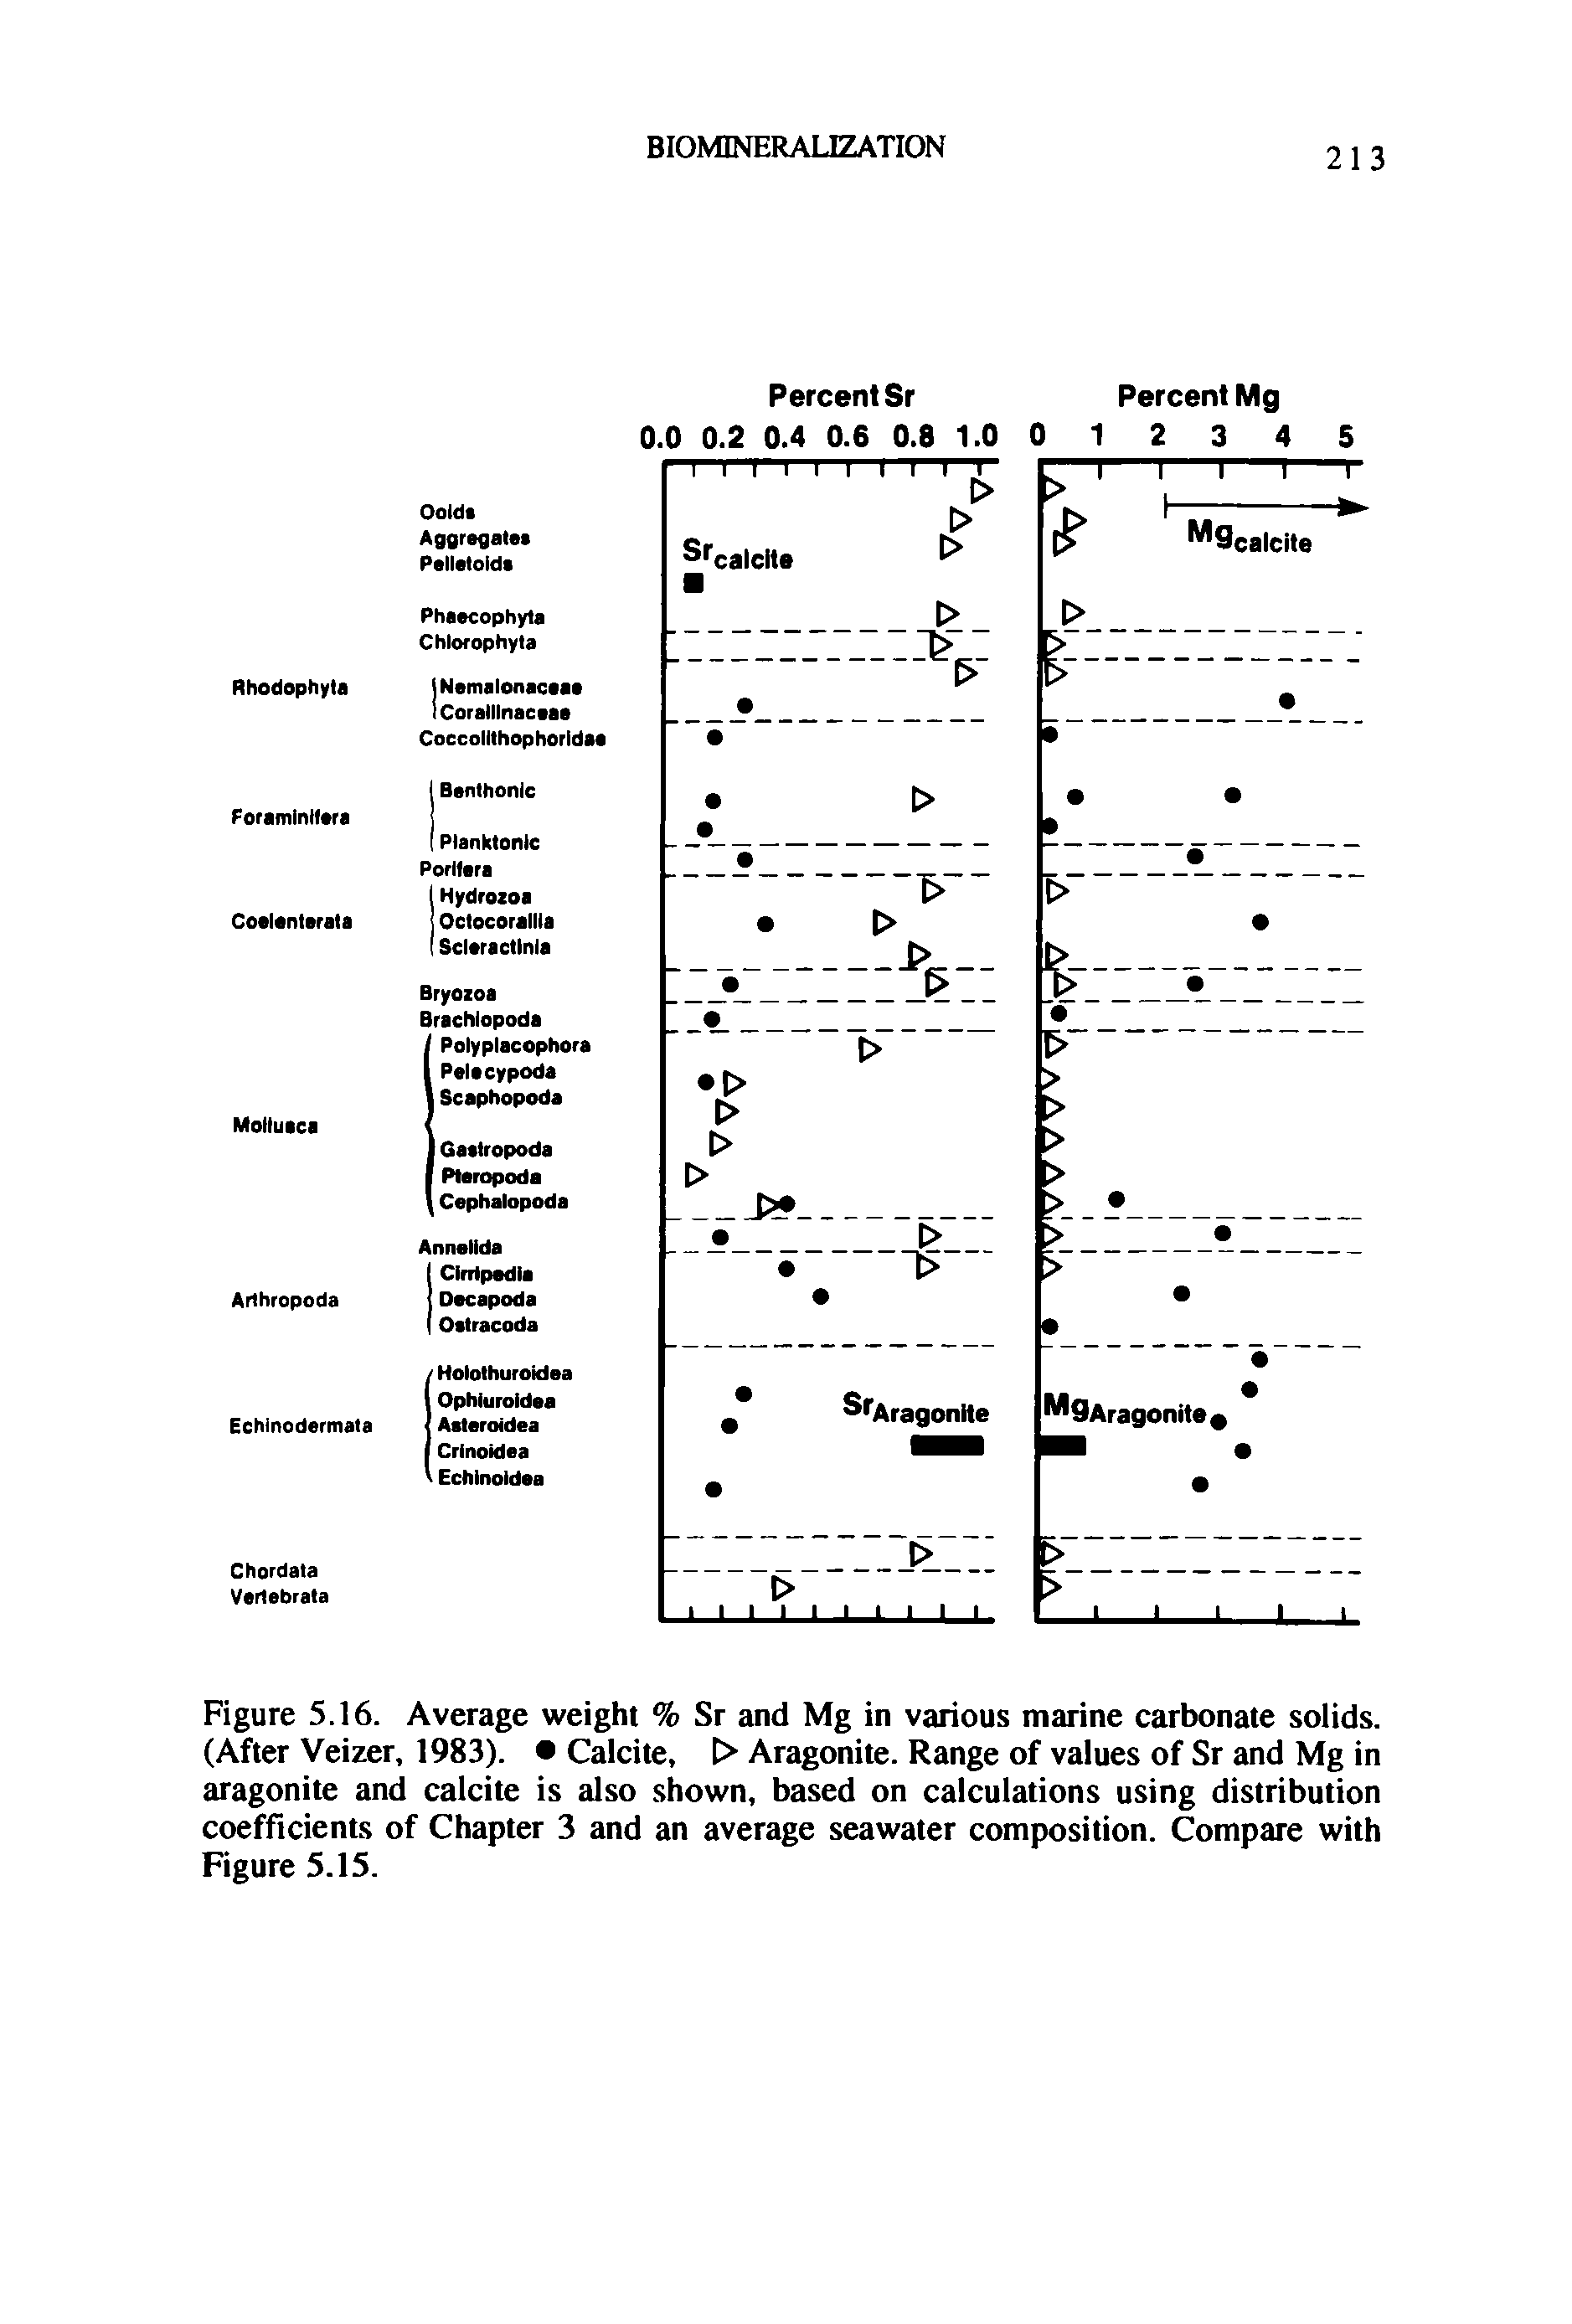 Figure 5.16. Average weight % Sr and Mg in various marine carbonate solids. (After Veizer, 1983). Calcite, > Aragonite. Range of values of Sr and Mg in aragonite and calcite is also shown, based on calculations using distribution coefficients of Chapter 3 and an average seawater composition. Compare with Figure 5.15.